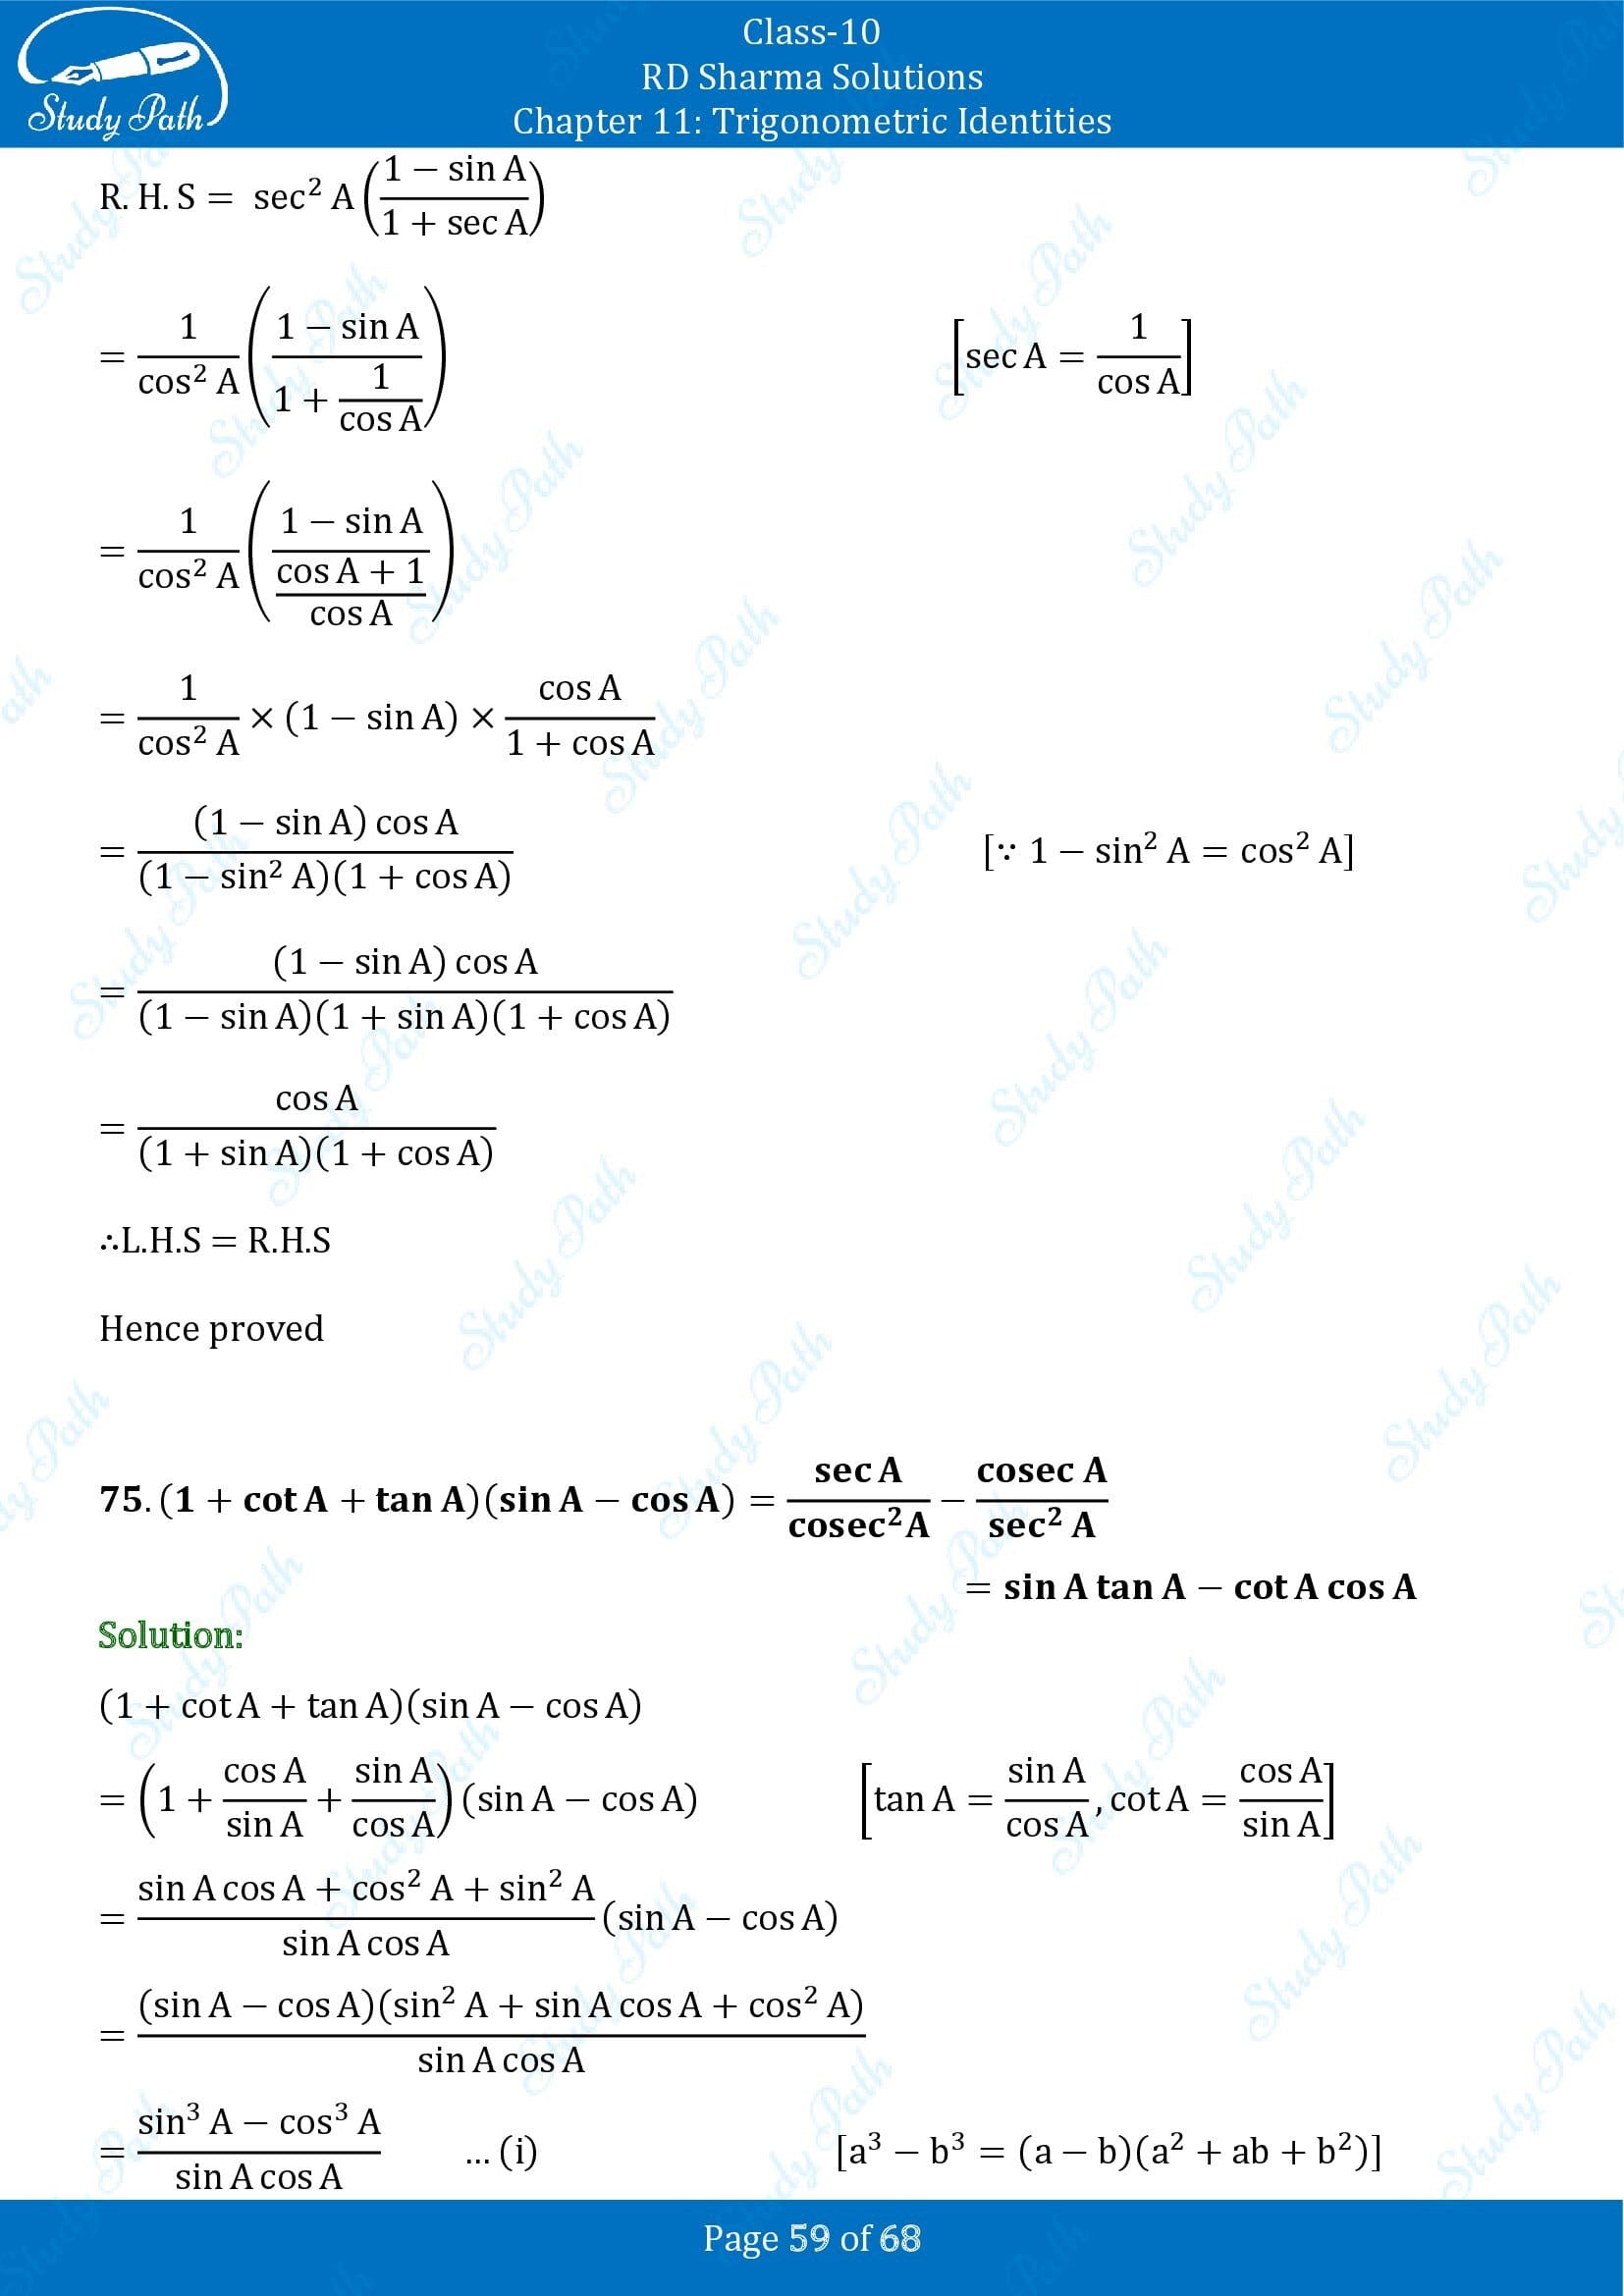 RD Sharma Solutions Class 10 Chapter 11 Trigonometric Identities Exercise 11.1 00059